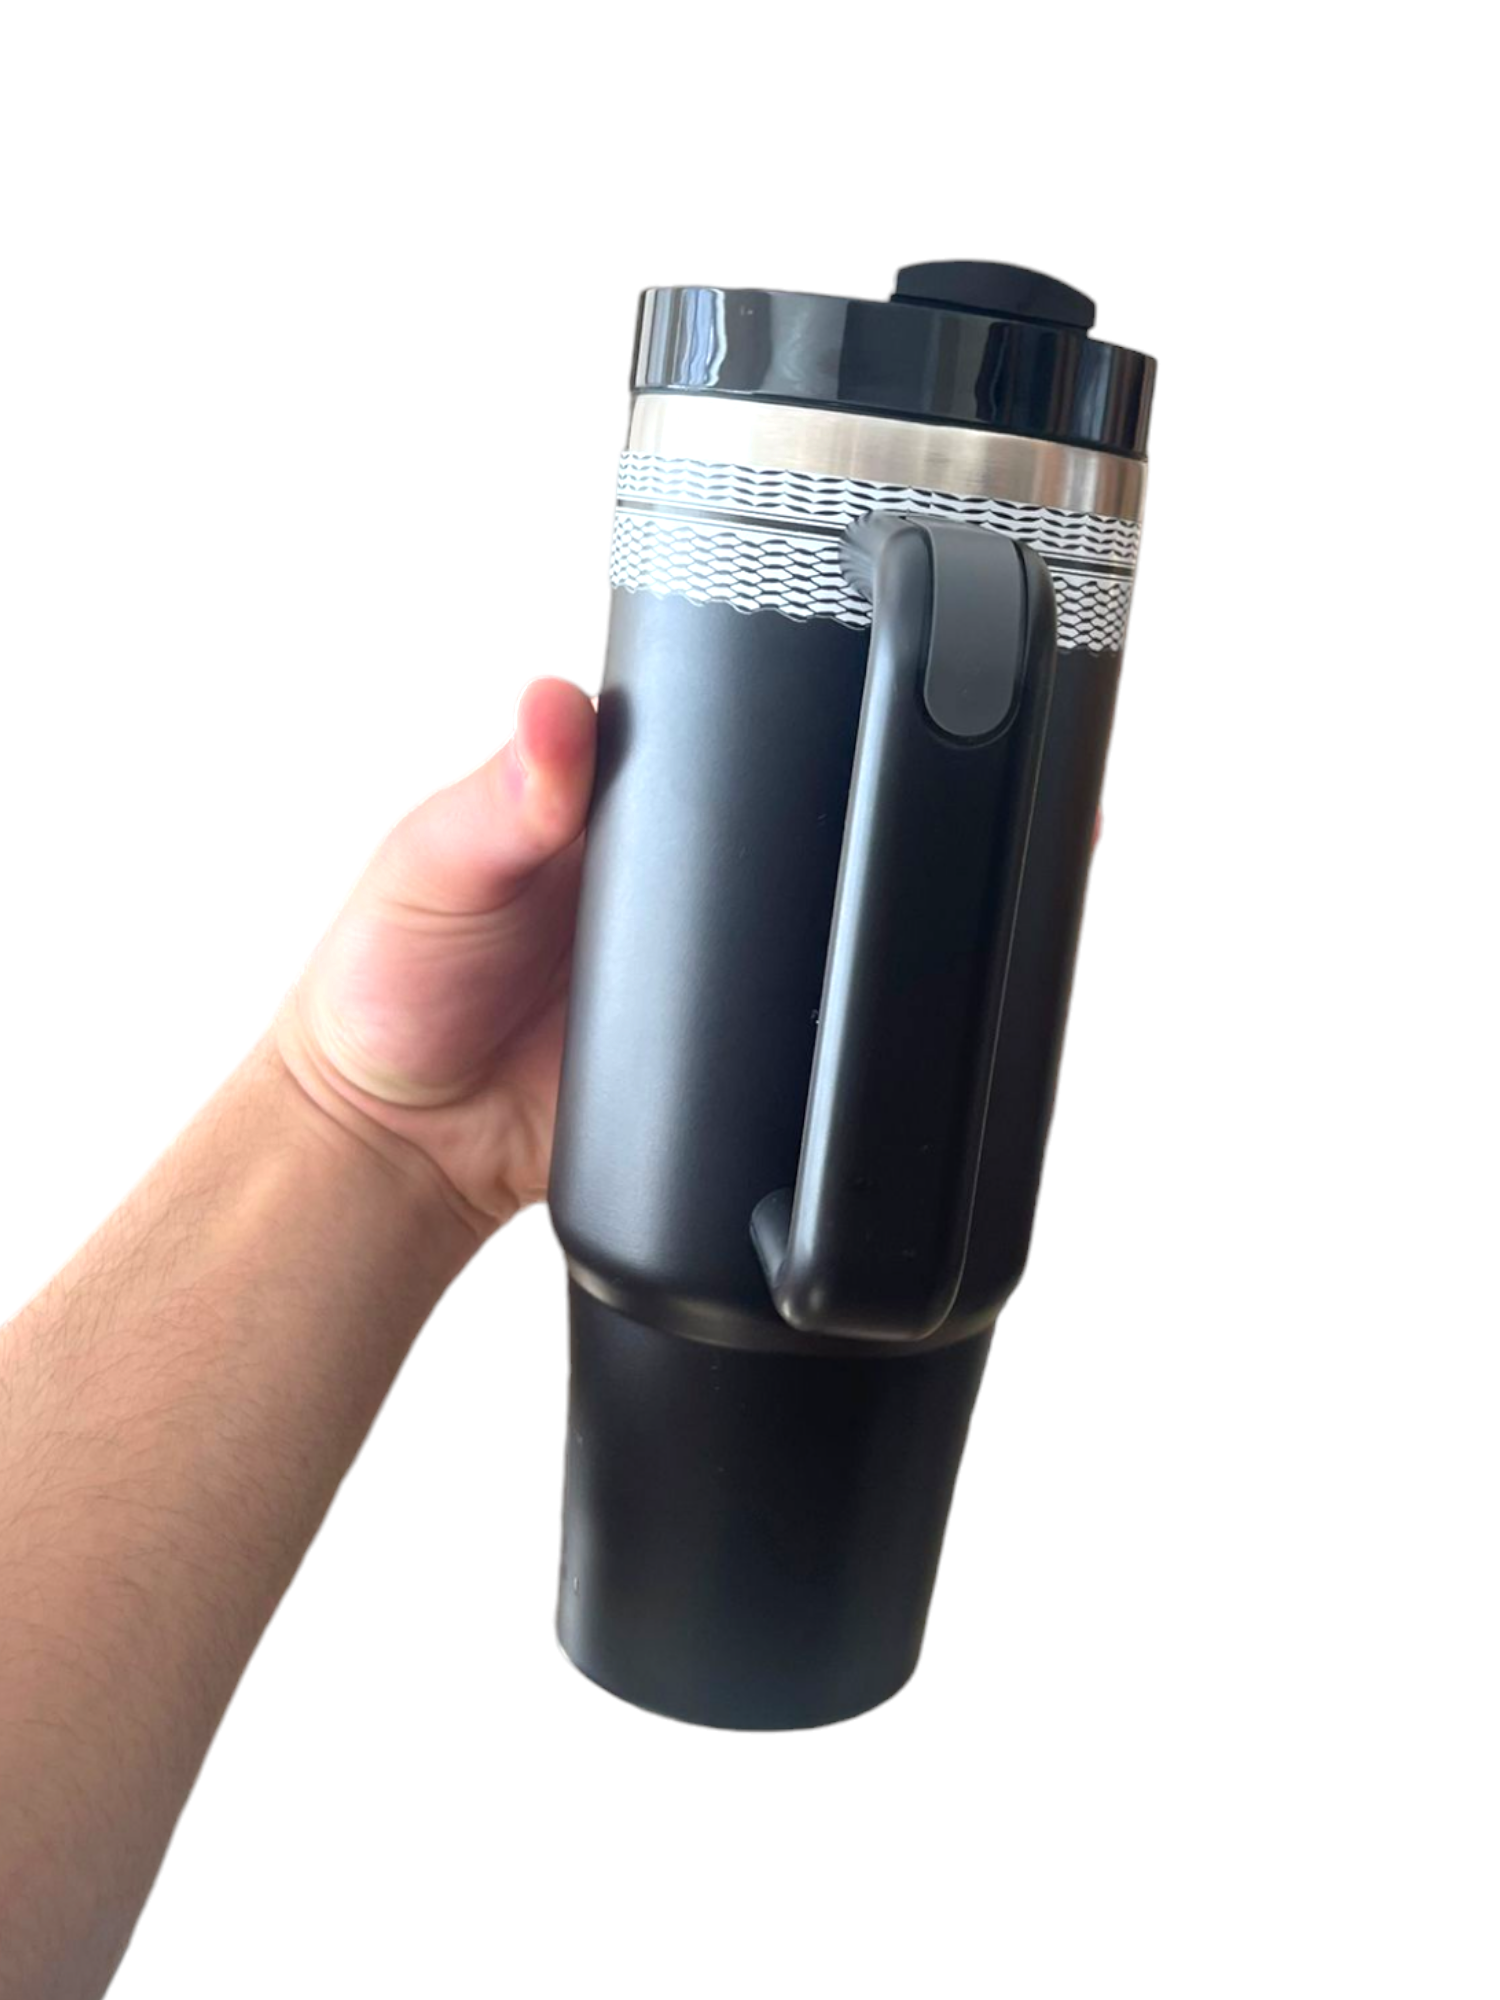 30oz Tumbler Cup Double Wall Stainless Steel Vacuum Insulted Mug with Handle - Keffiyeh Design - Habibi Heritage